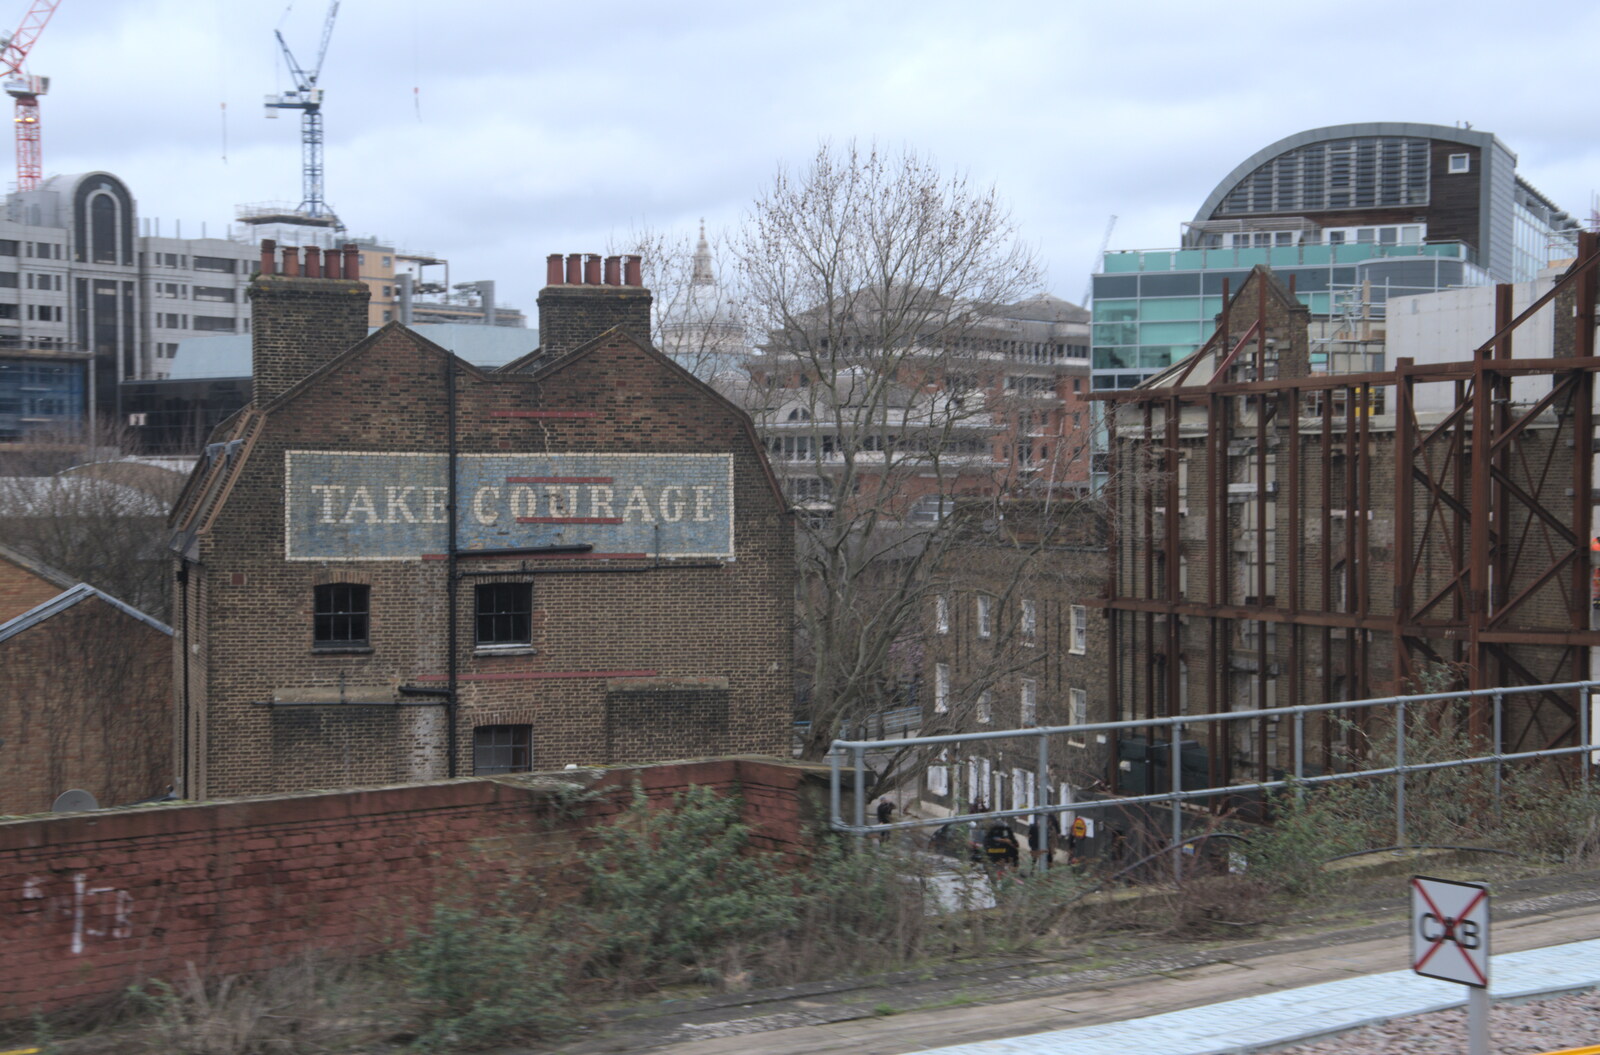 Take Courage wall advert near London Bridge from HMS Belfast and the South Bank, Southwark, London - 17th February 2020